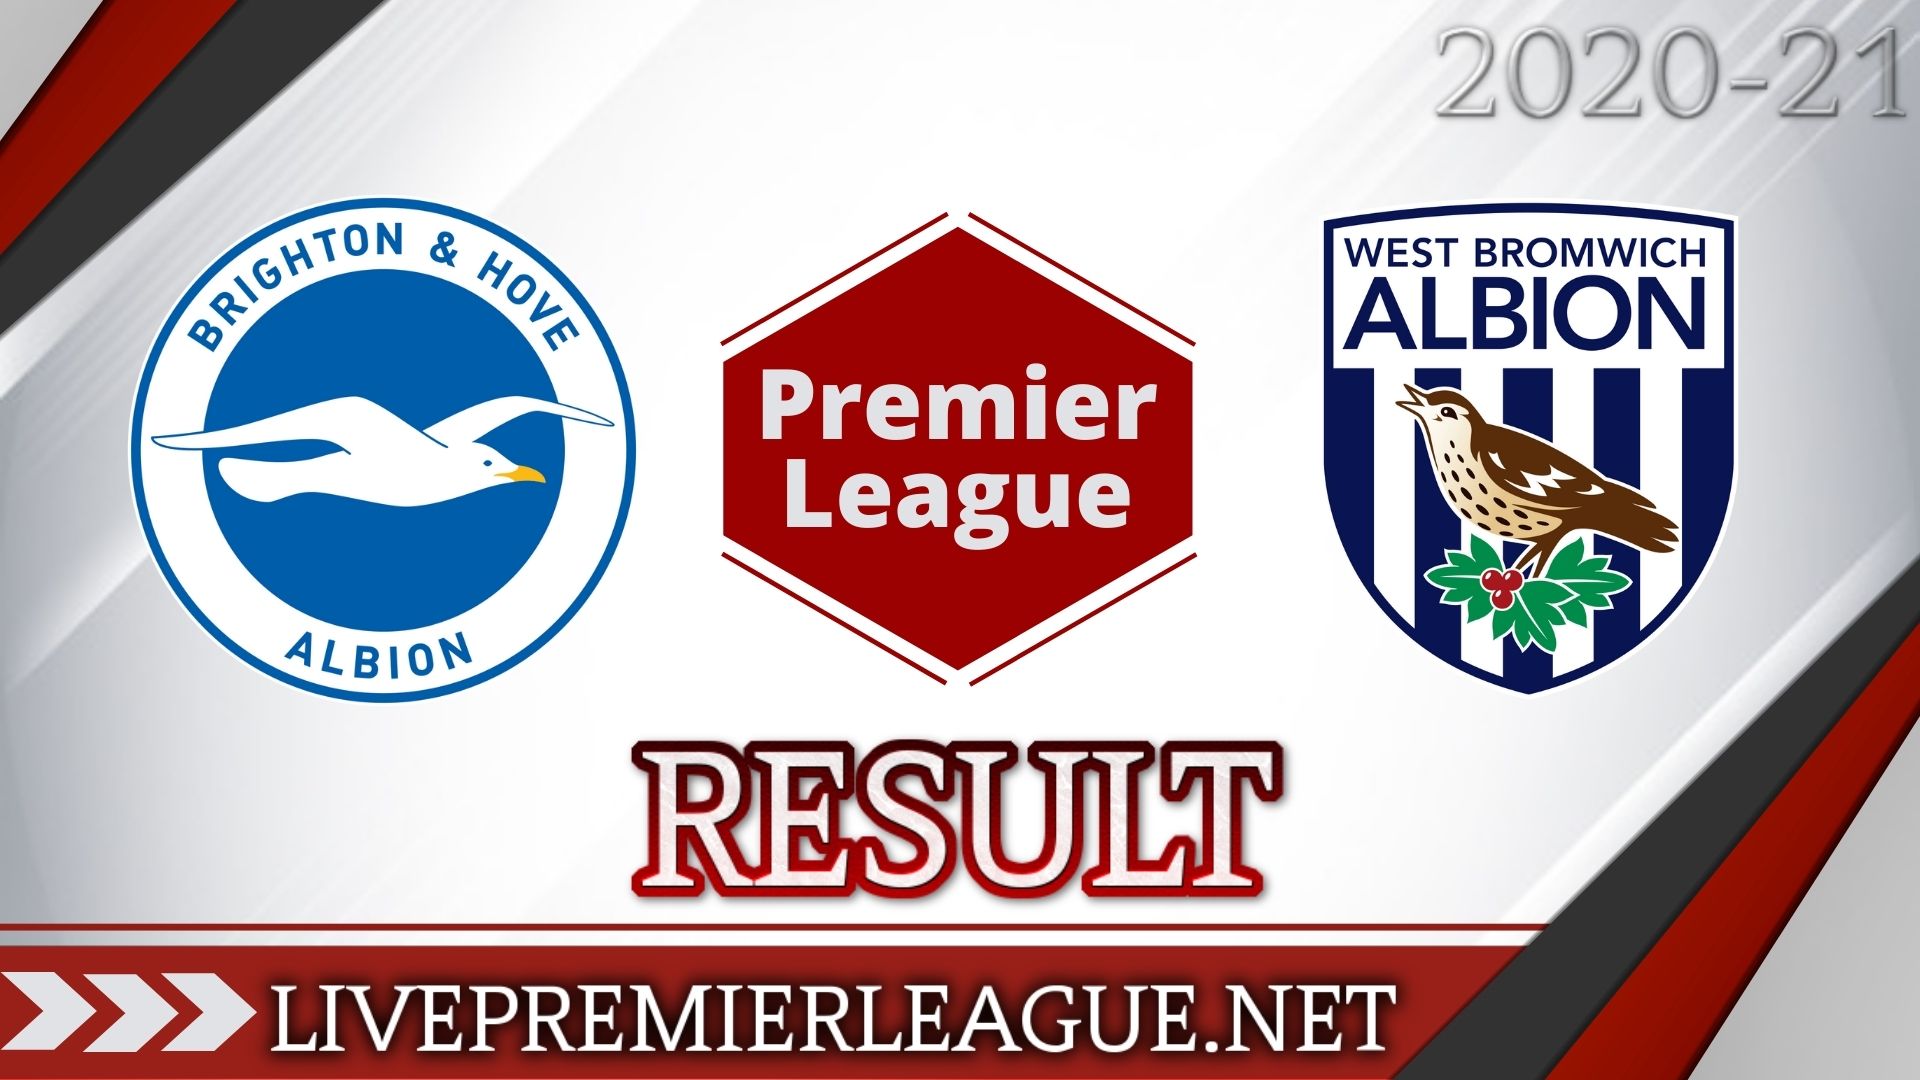 Brighton And Hove Albion Vs West Bromwich Albion | Week 6 Result 2020